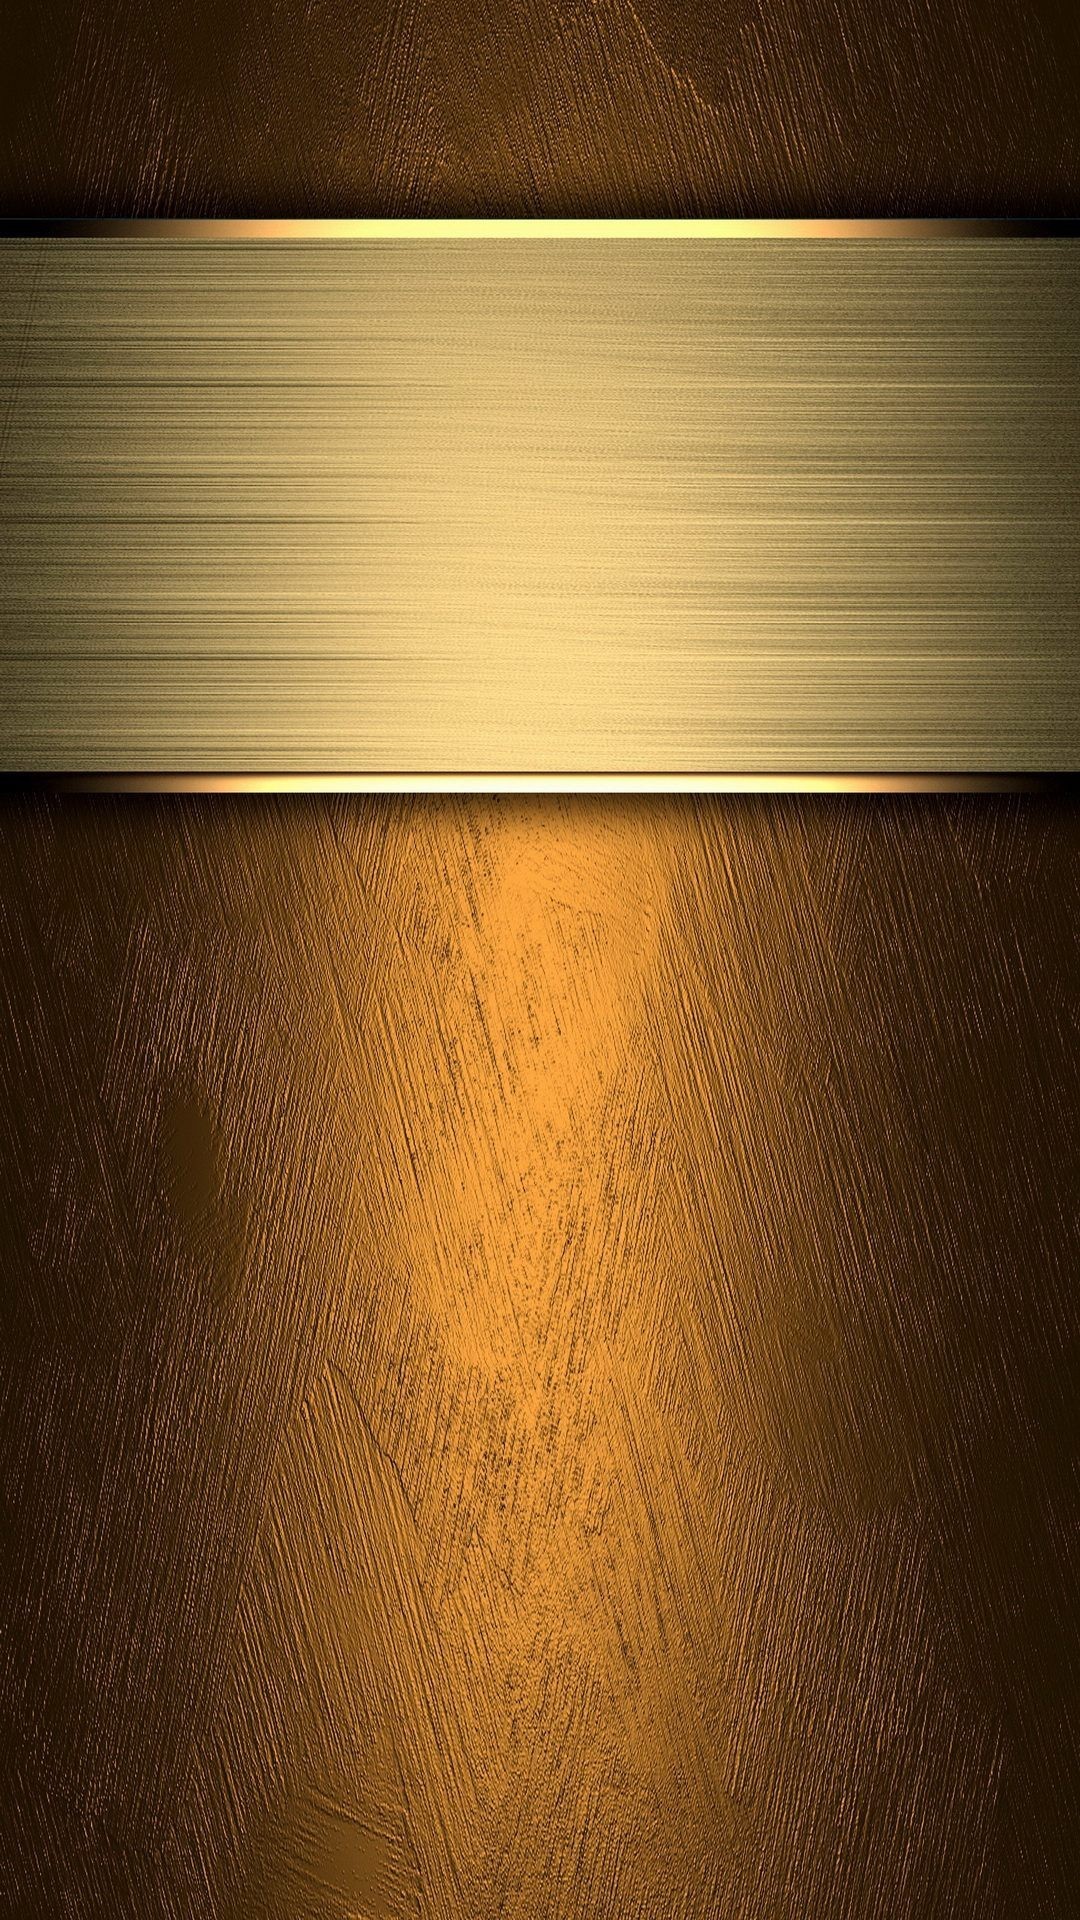 1080x1920 Gold iPhone 6 Plus Wallpapers - abstract, background iPhone 6 Plus .